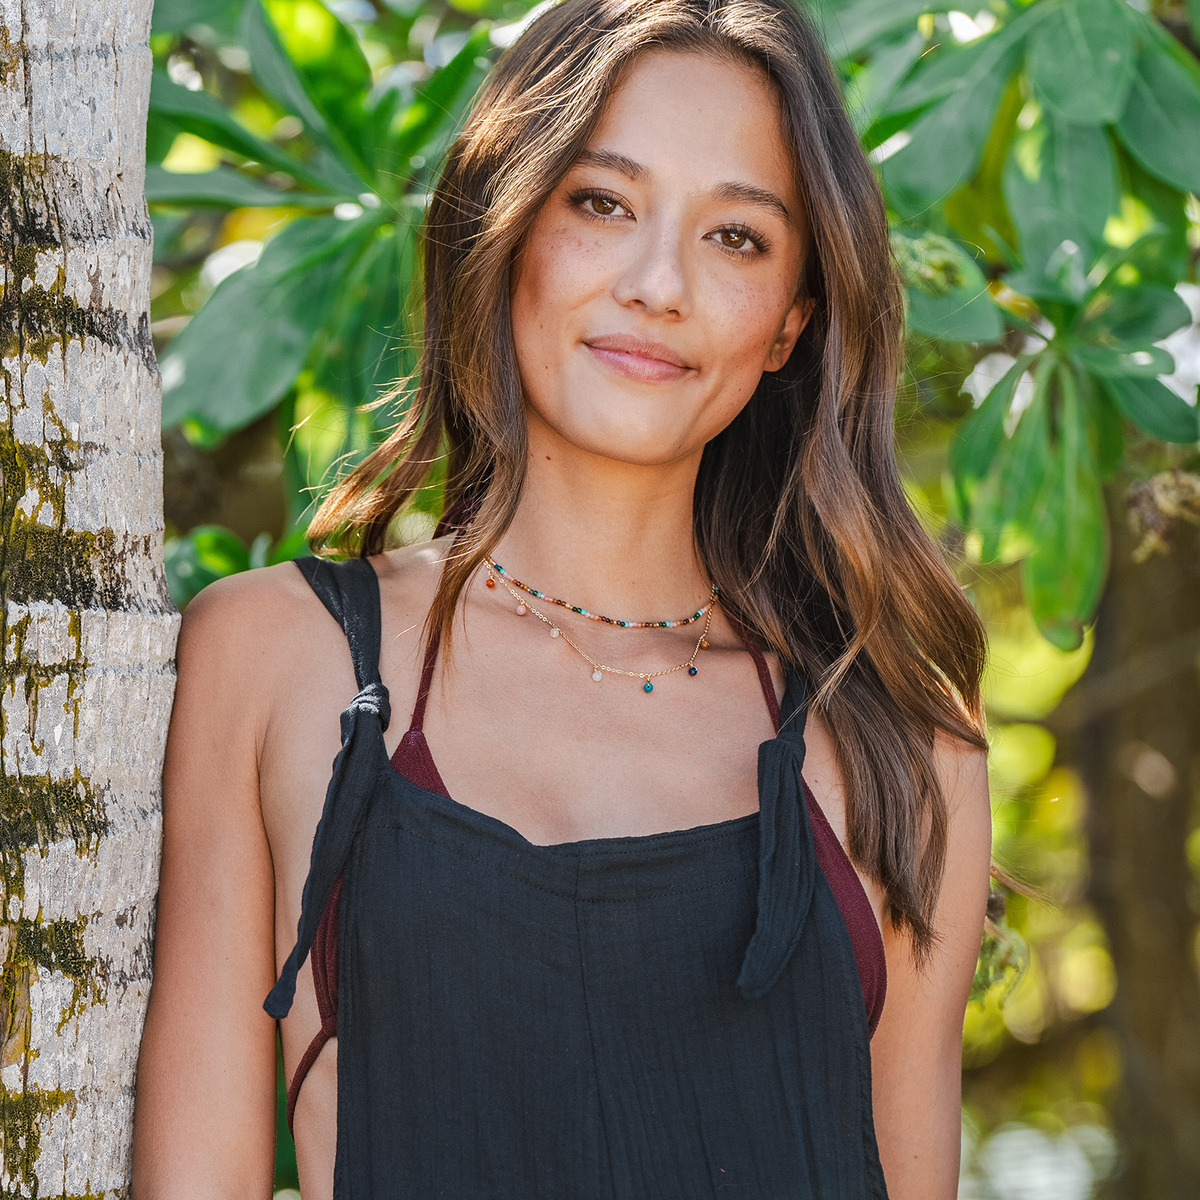 Model wearing a healing necklace stack. The stack includes a 2mm multicolor stone healing necklace and a gold chain necklace with multicolor stone dewdrop charms